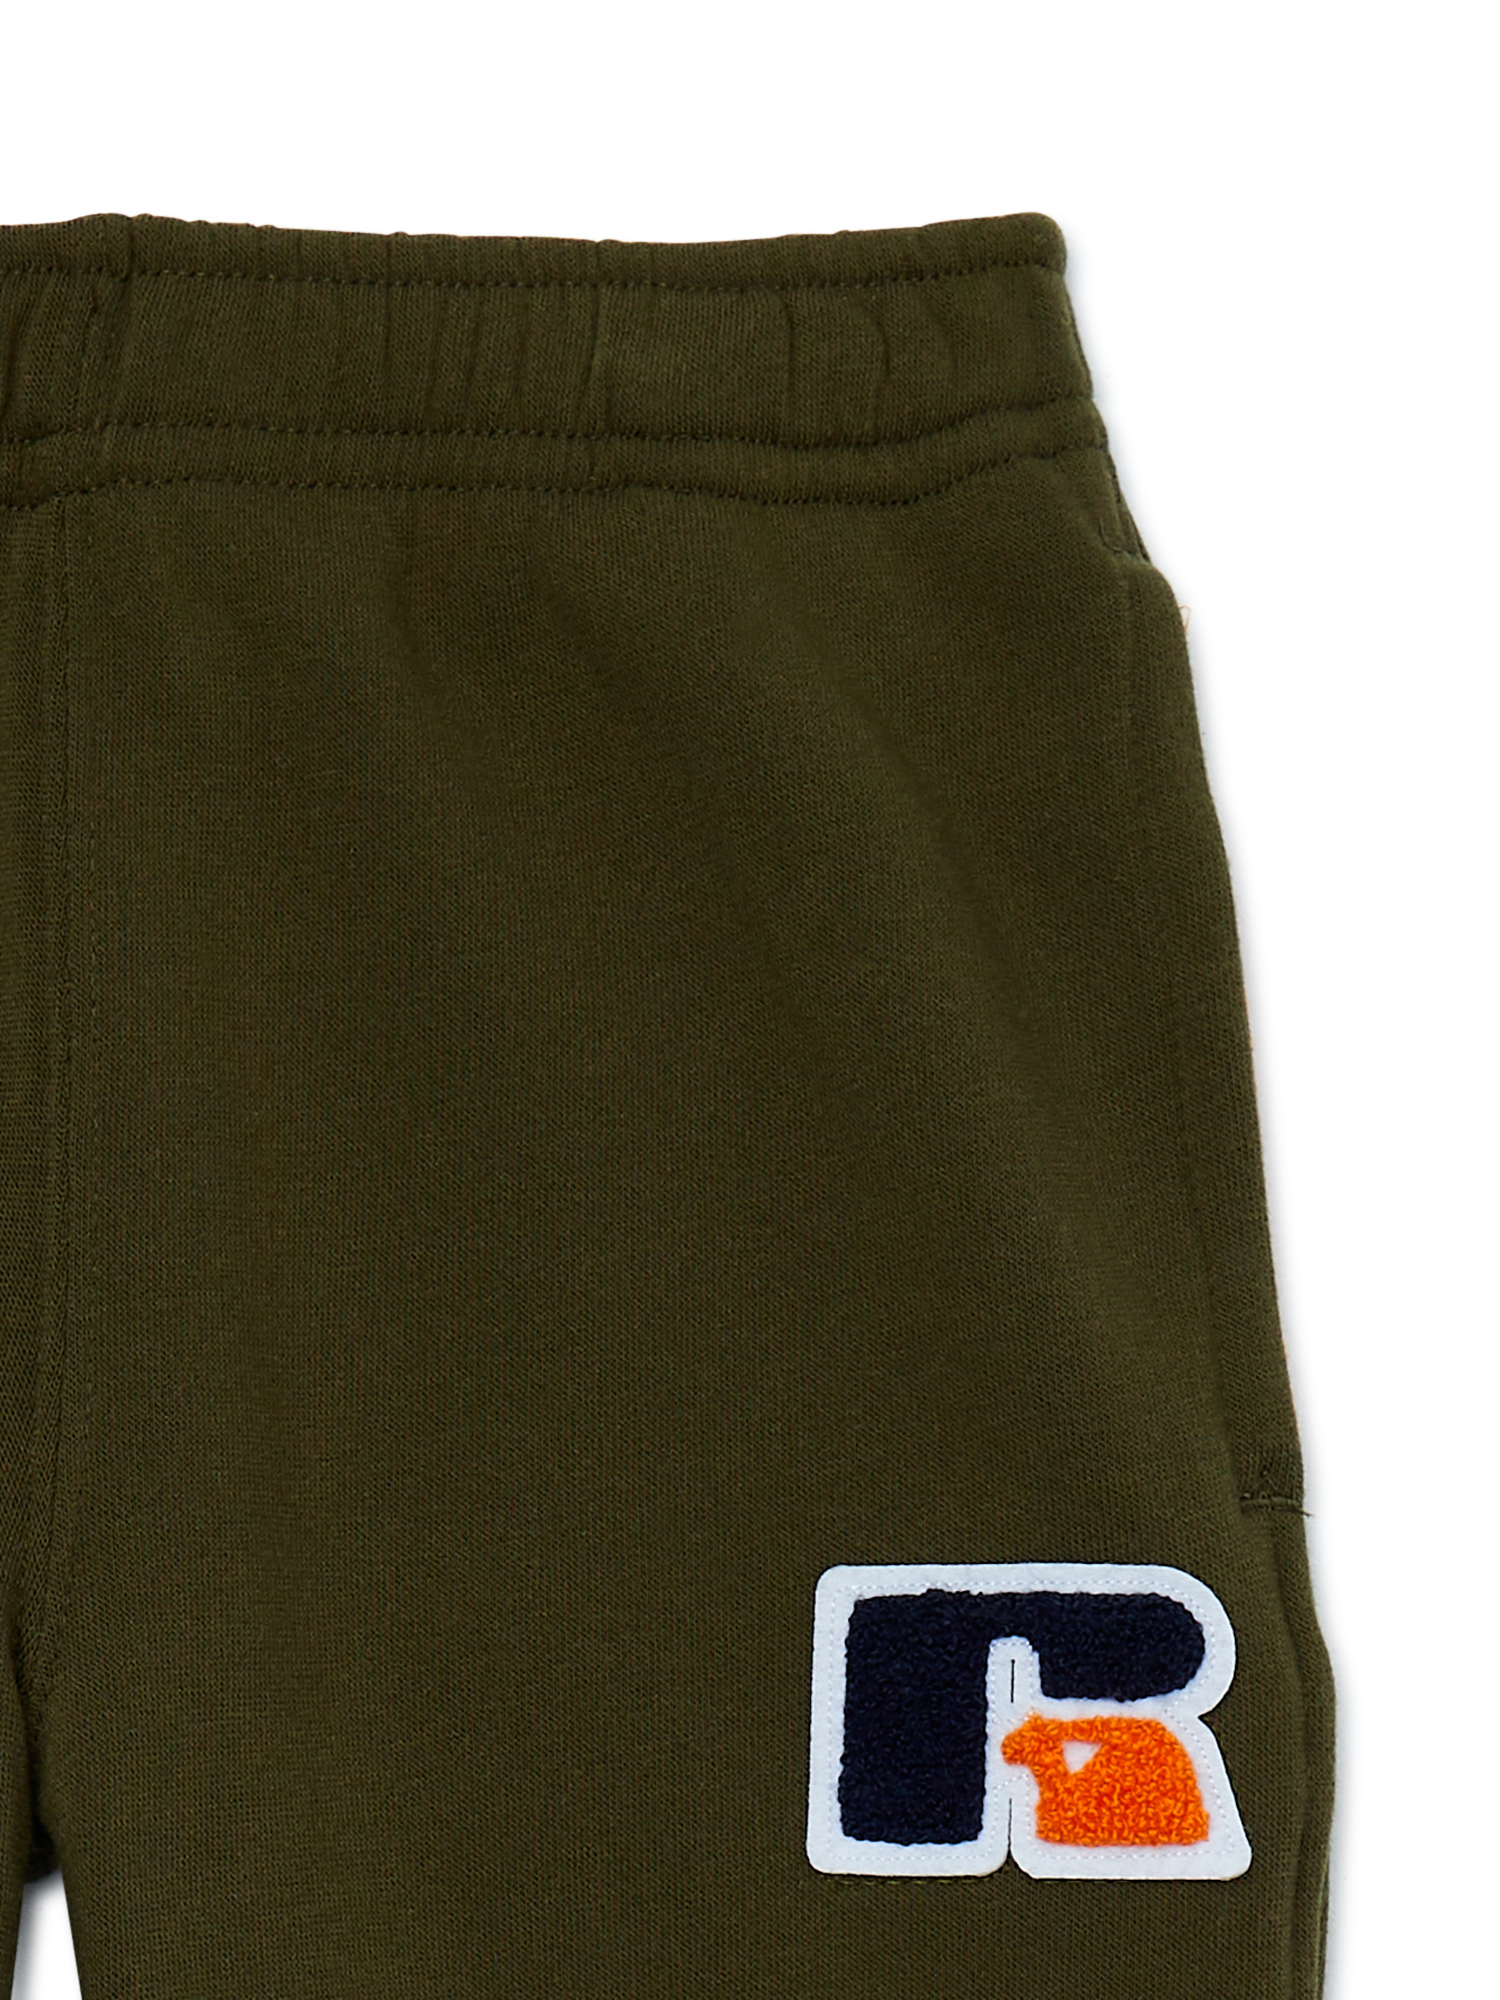 Russell Athletic Boys Chenille Jogger Pants, Sizes 4-16 - image 2 of 5